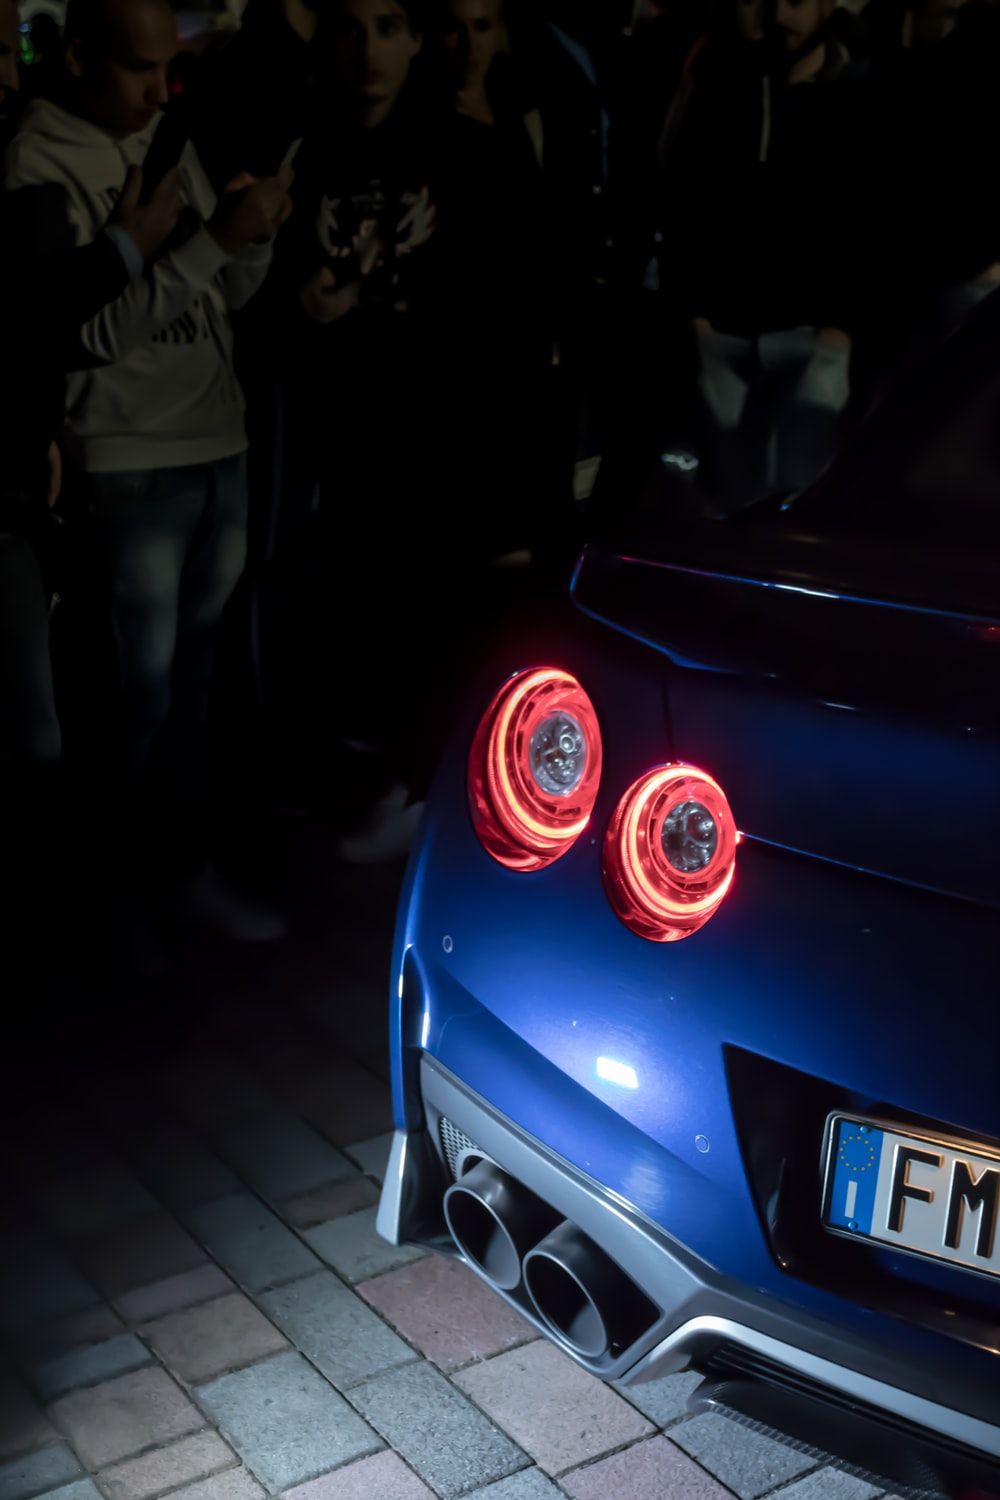 Nissan R35 Gtr Picture. Download Free Image